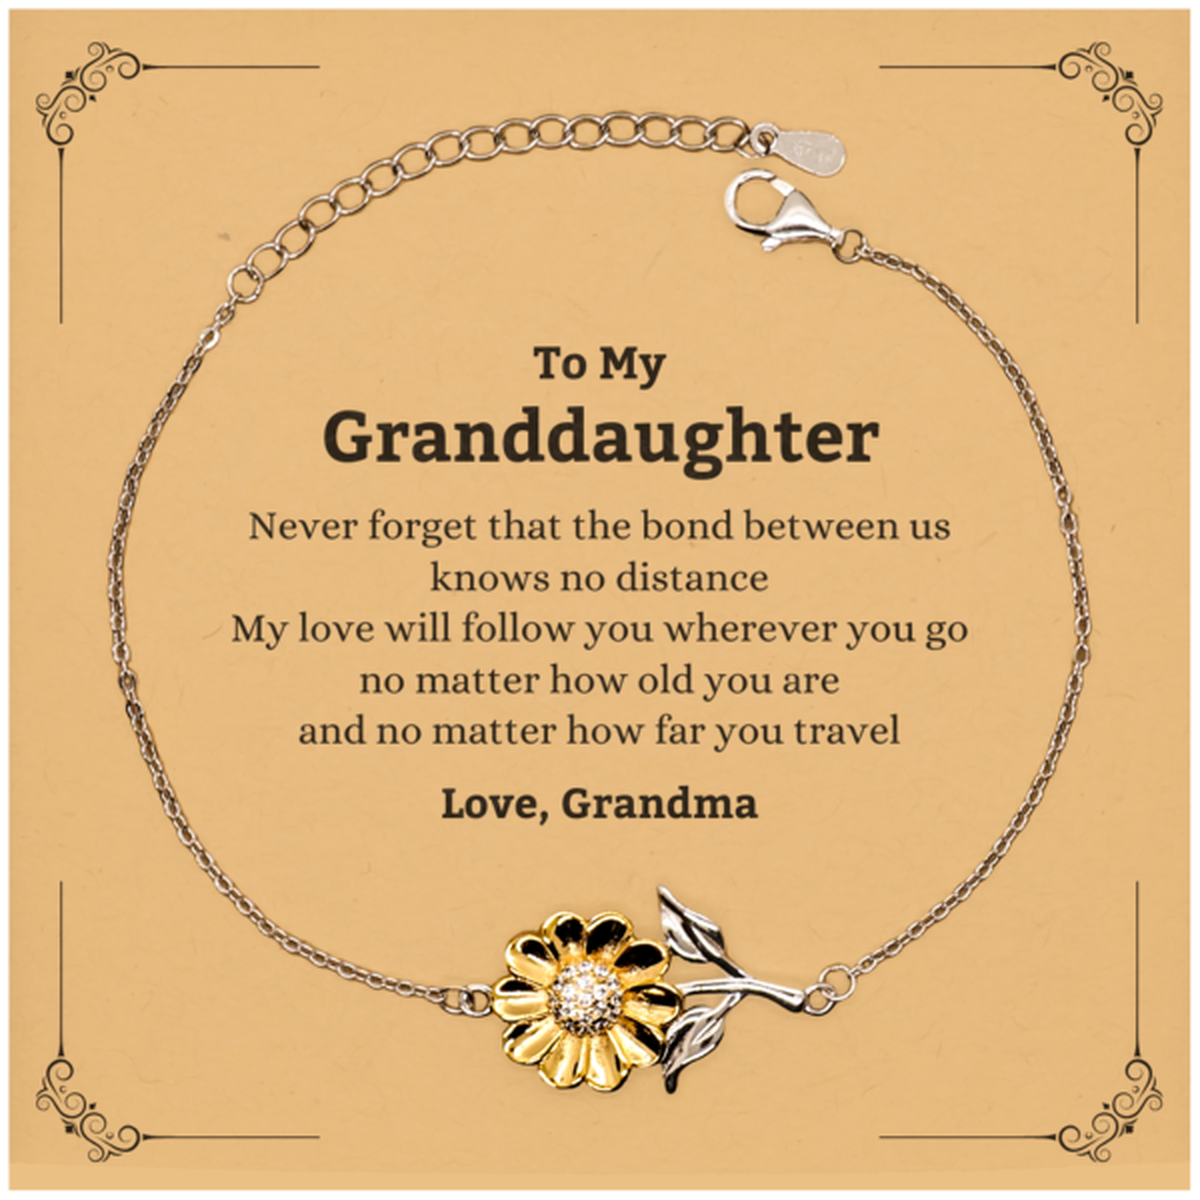 Granddaughter Birthday Gifts from Grandma, Adjustable Sunflower Bracelet for Granddaughter Christmas Graduation Unique Gifts Granddaughter Never forget that the bond between us knows no distance. Love, Grandma